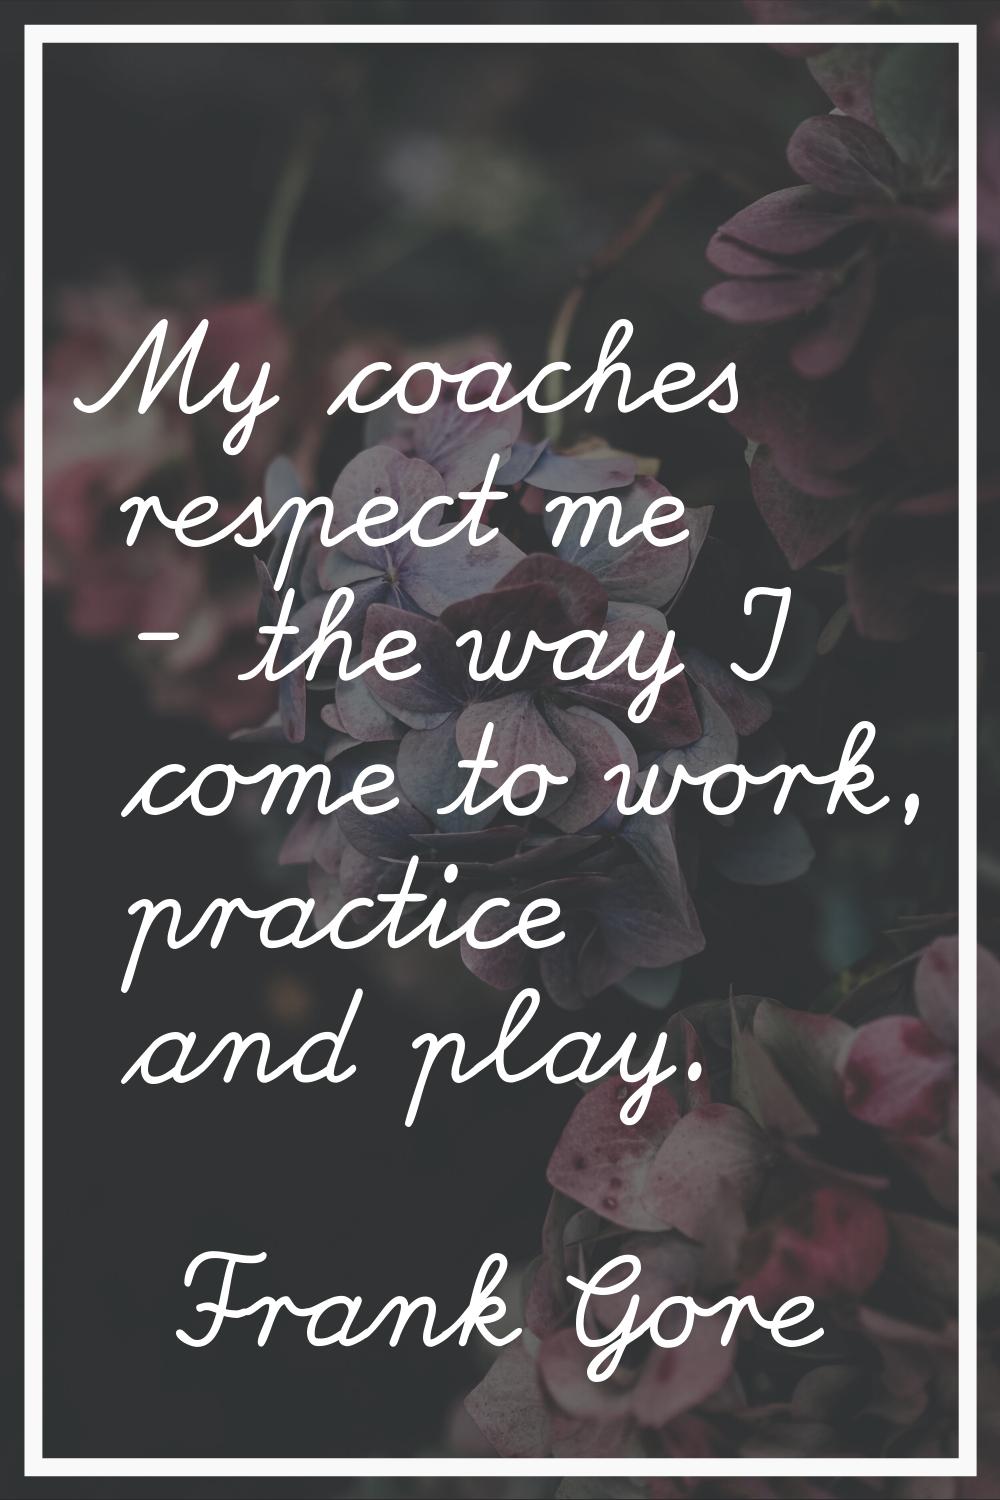 My coaches respect me - the way I come to work, practice and play.